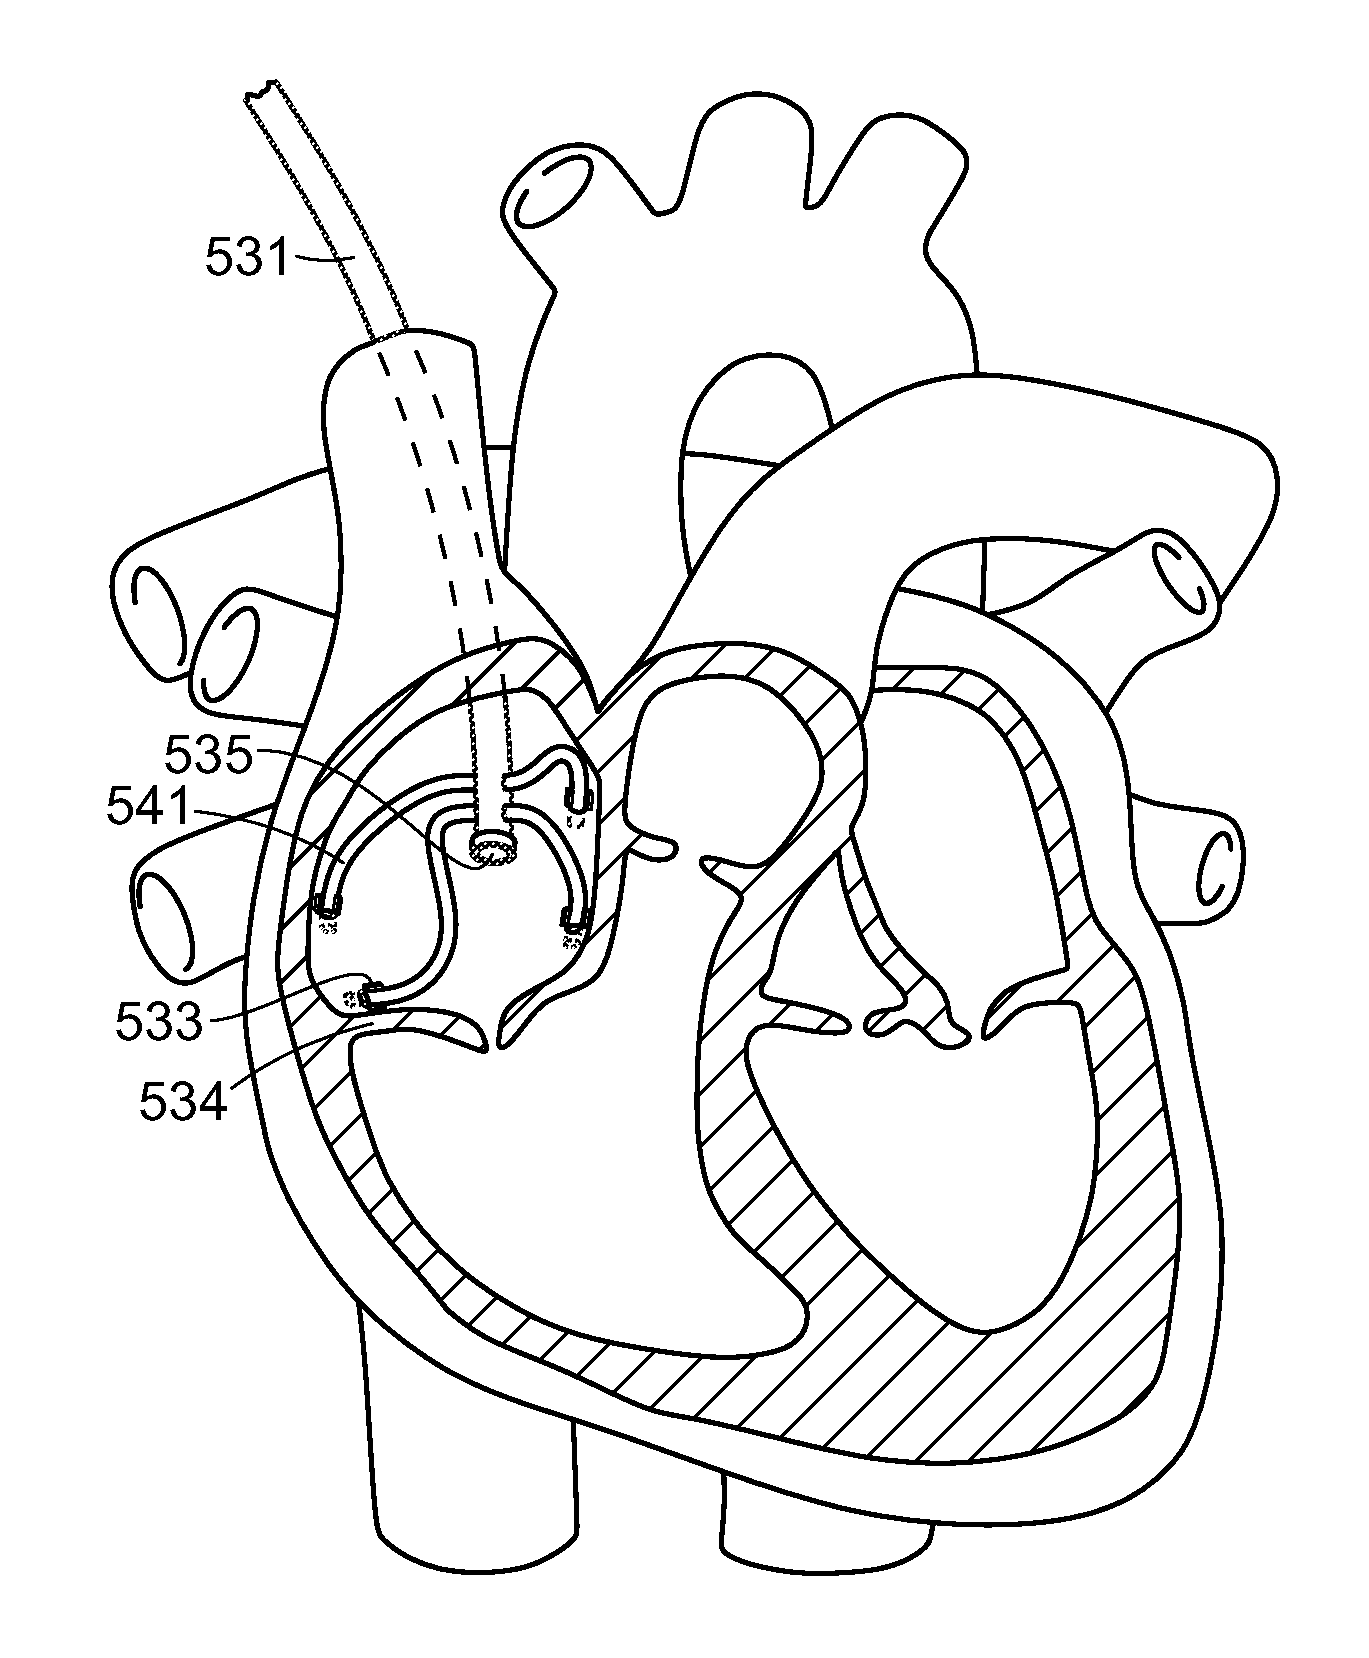 Catheter systems and related methods for mapping, minimizing, and treating cardiac fibrillation